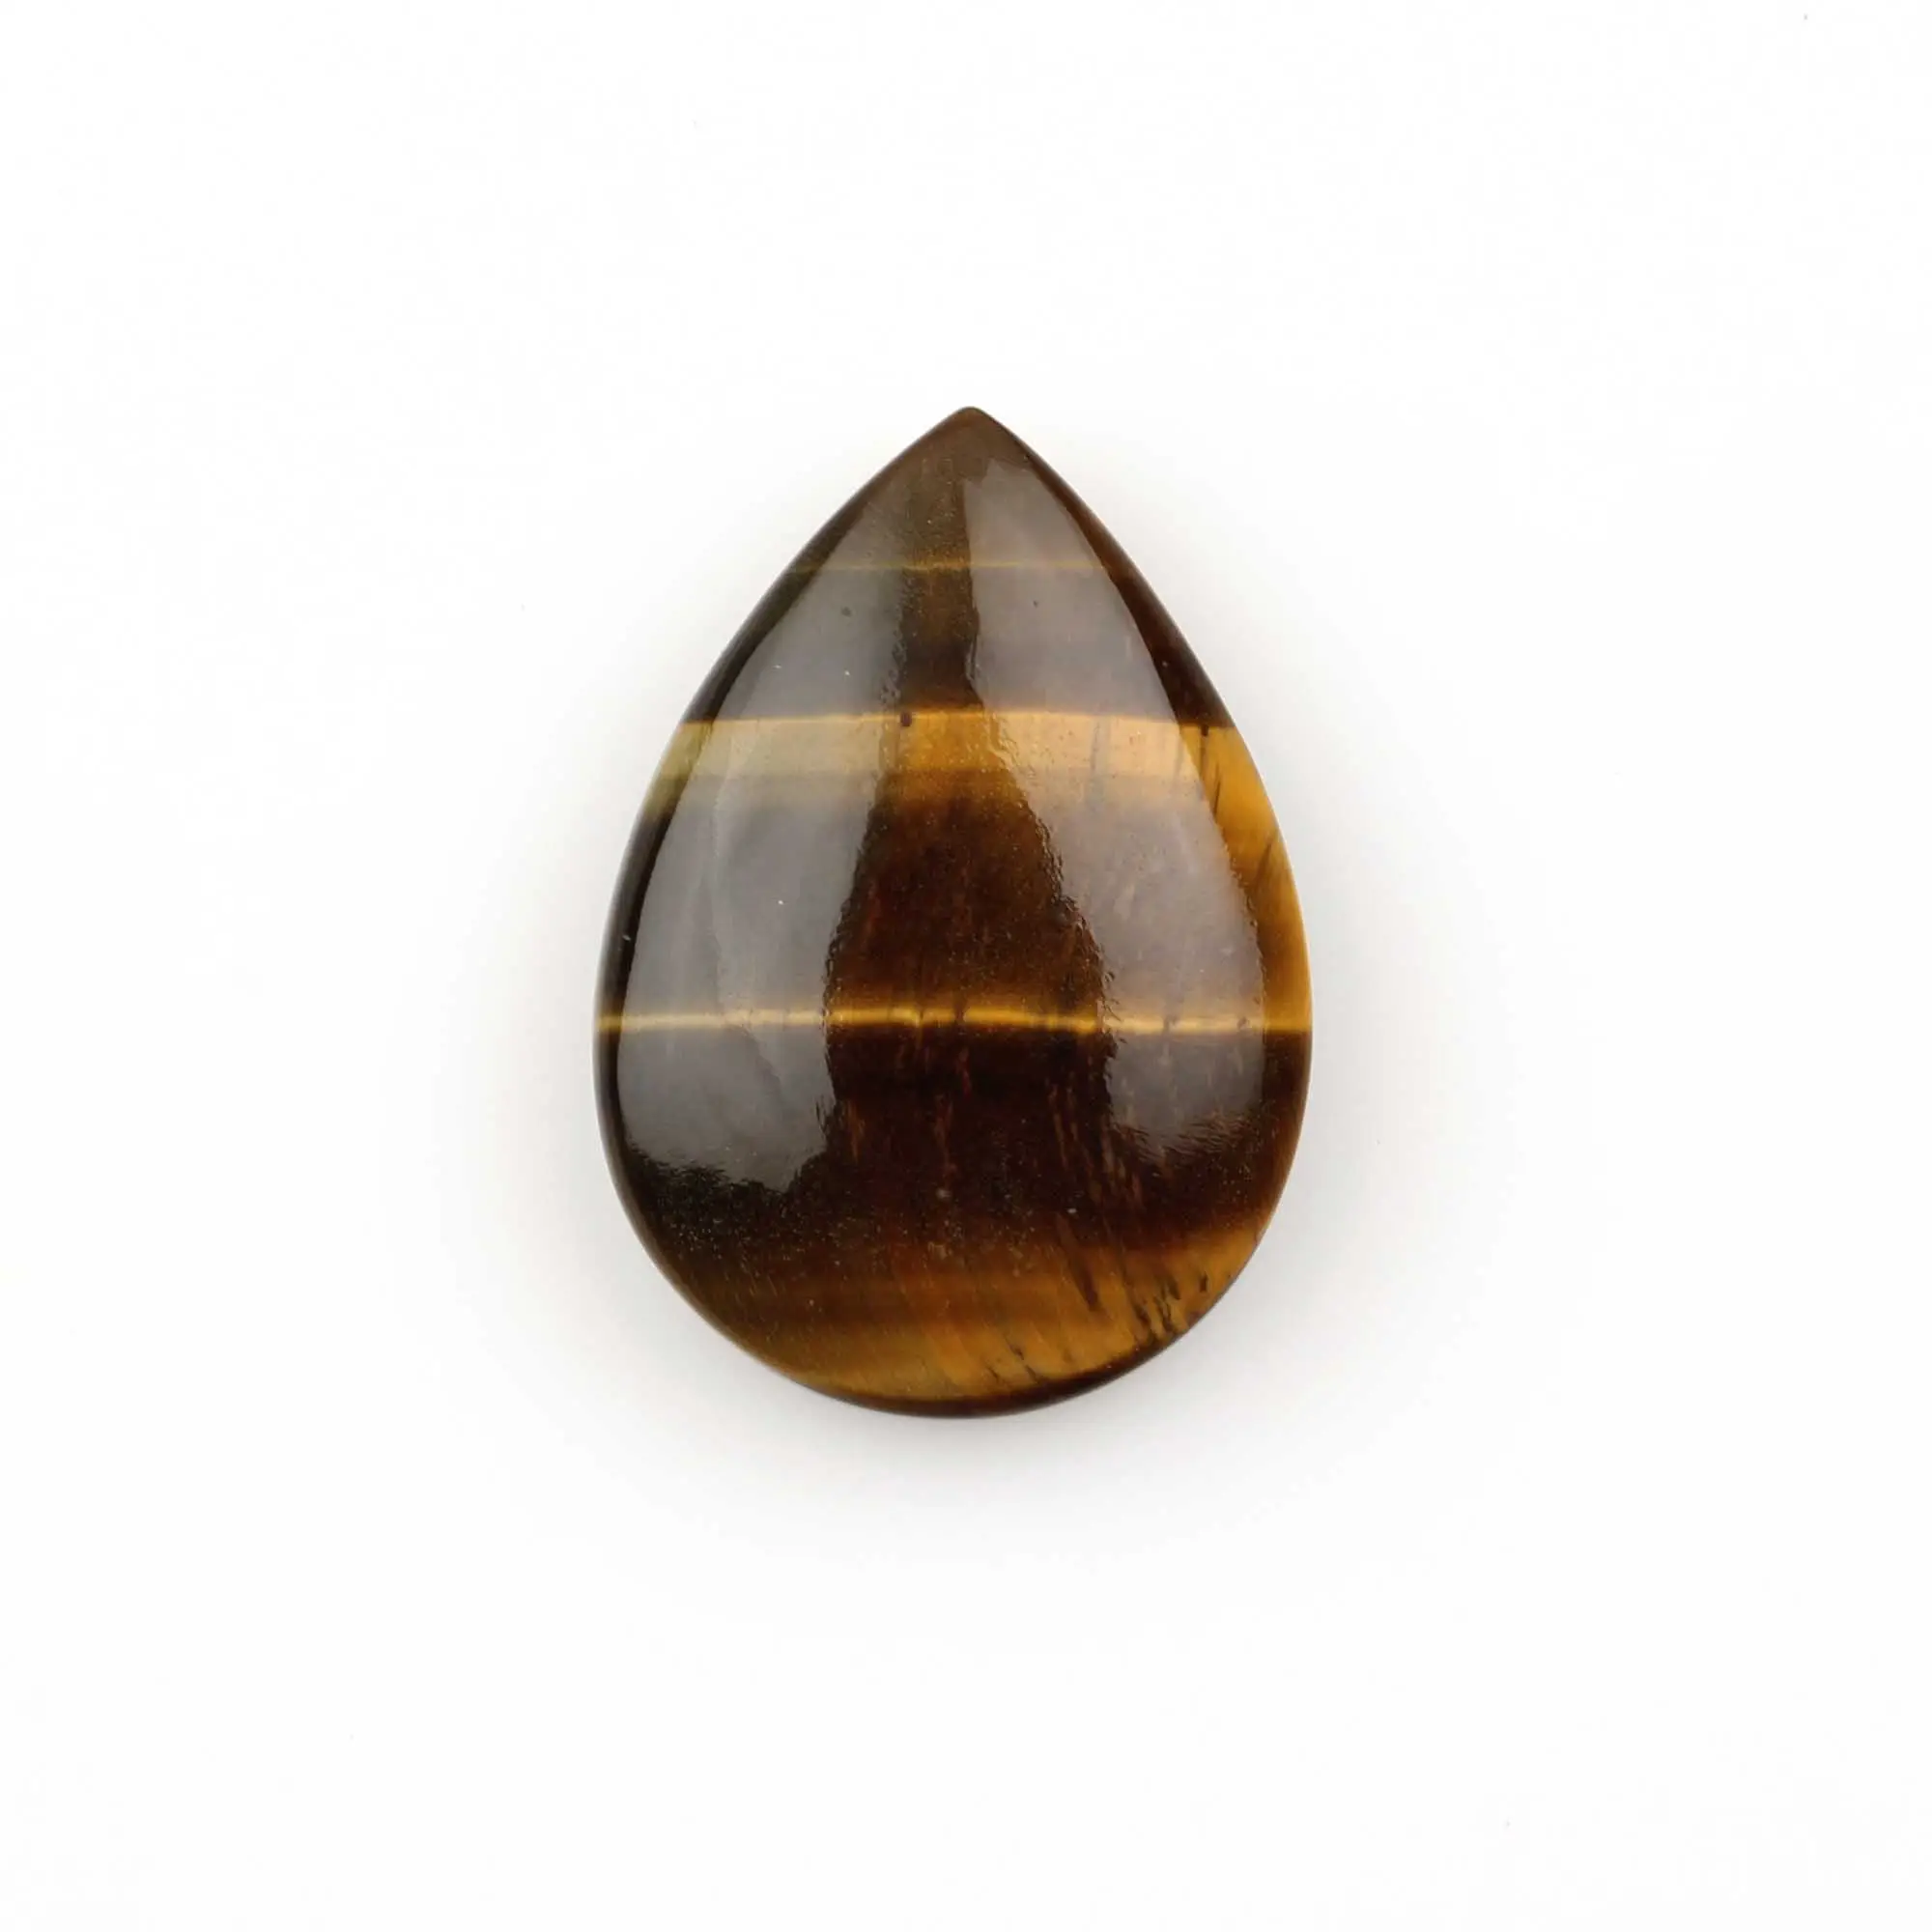 Top Quality 16x22mm Pear Natural Smooth Brown Yellow Tiger Eye Briolette Gemstone Jewelry Making Calibrated Size Polished Stones